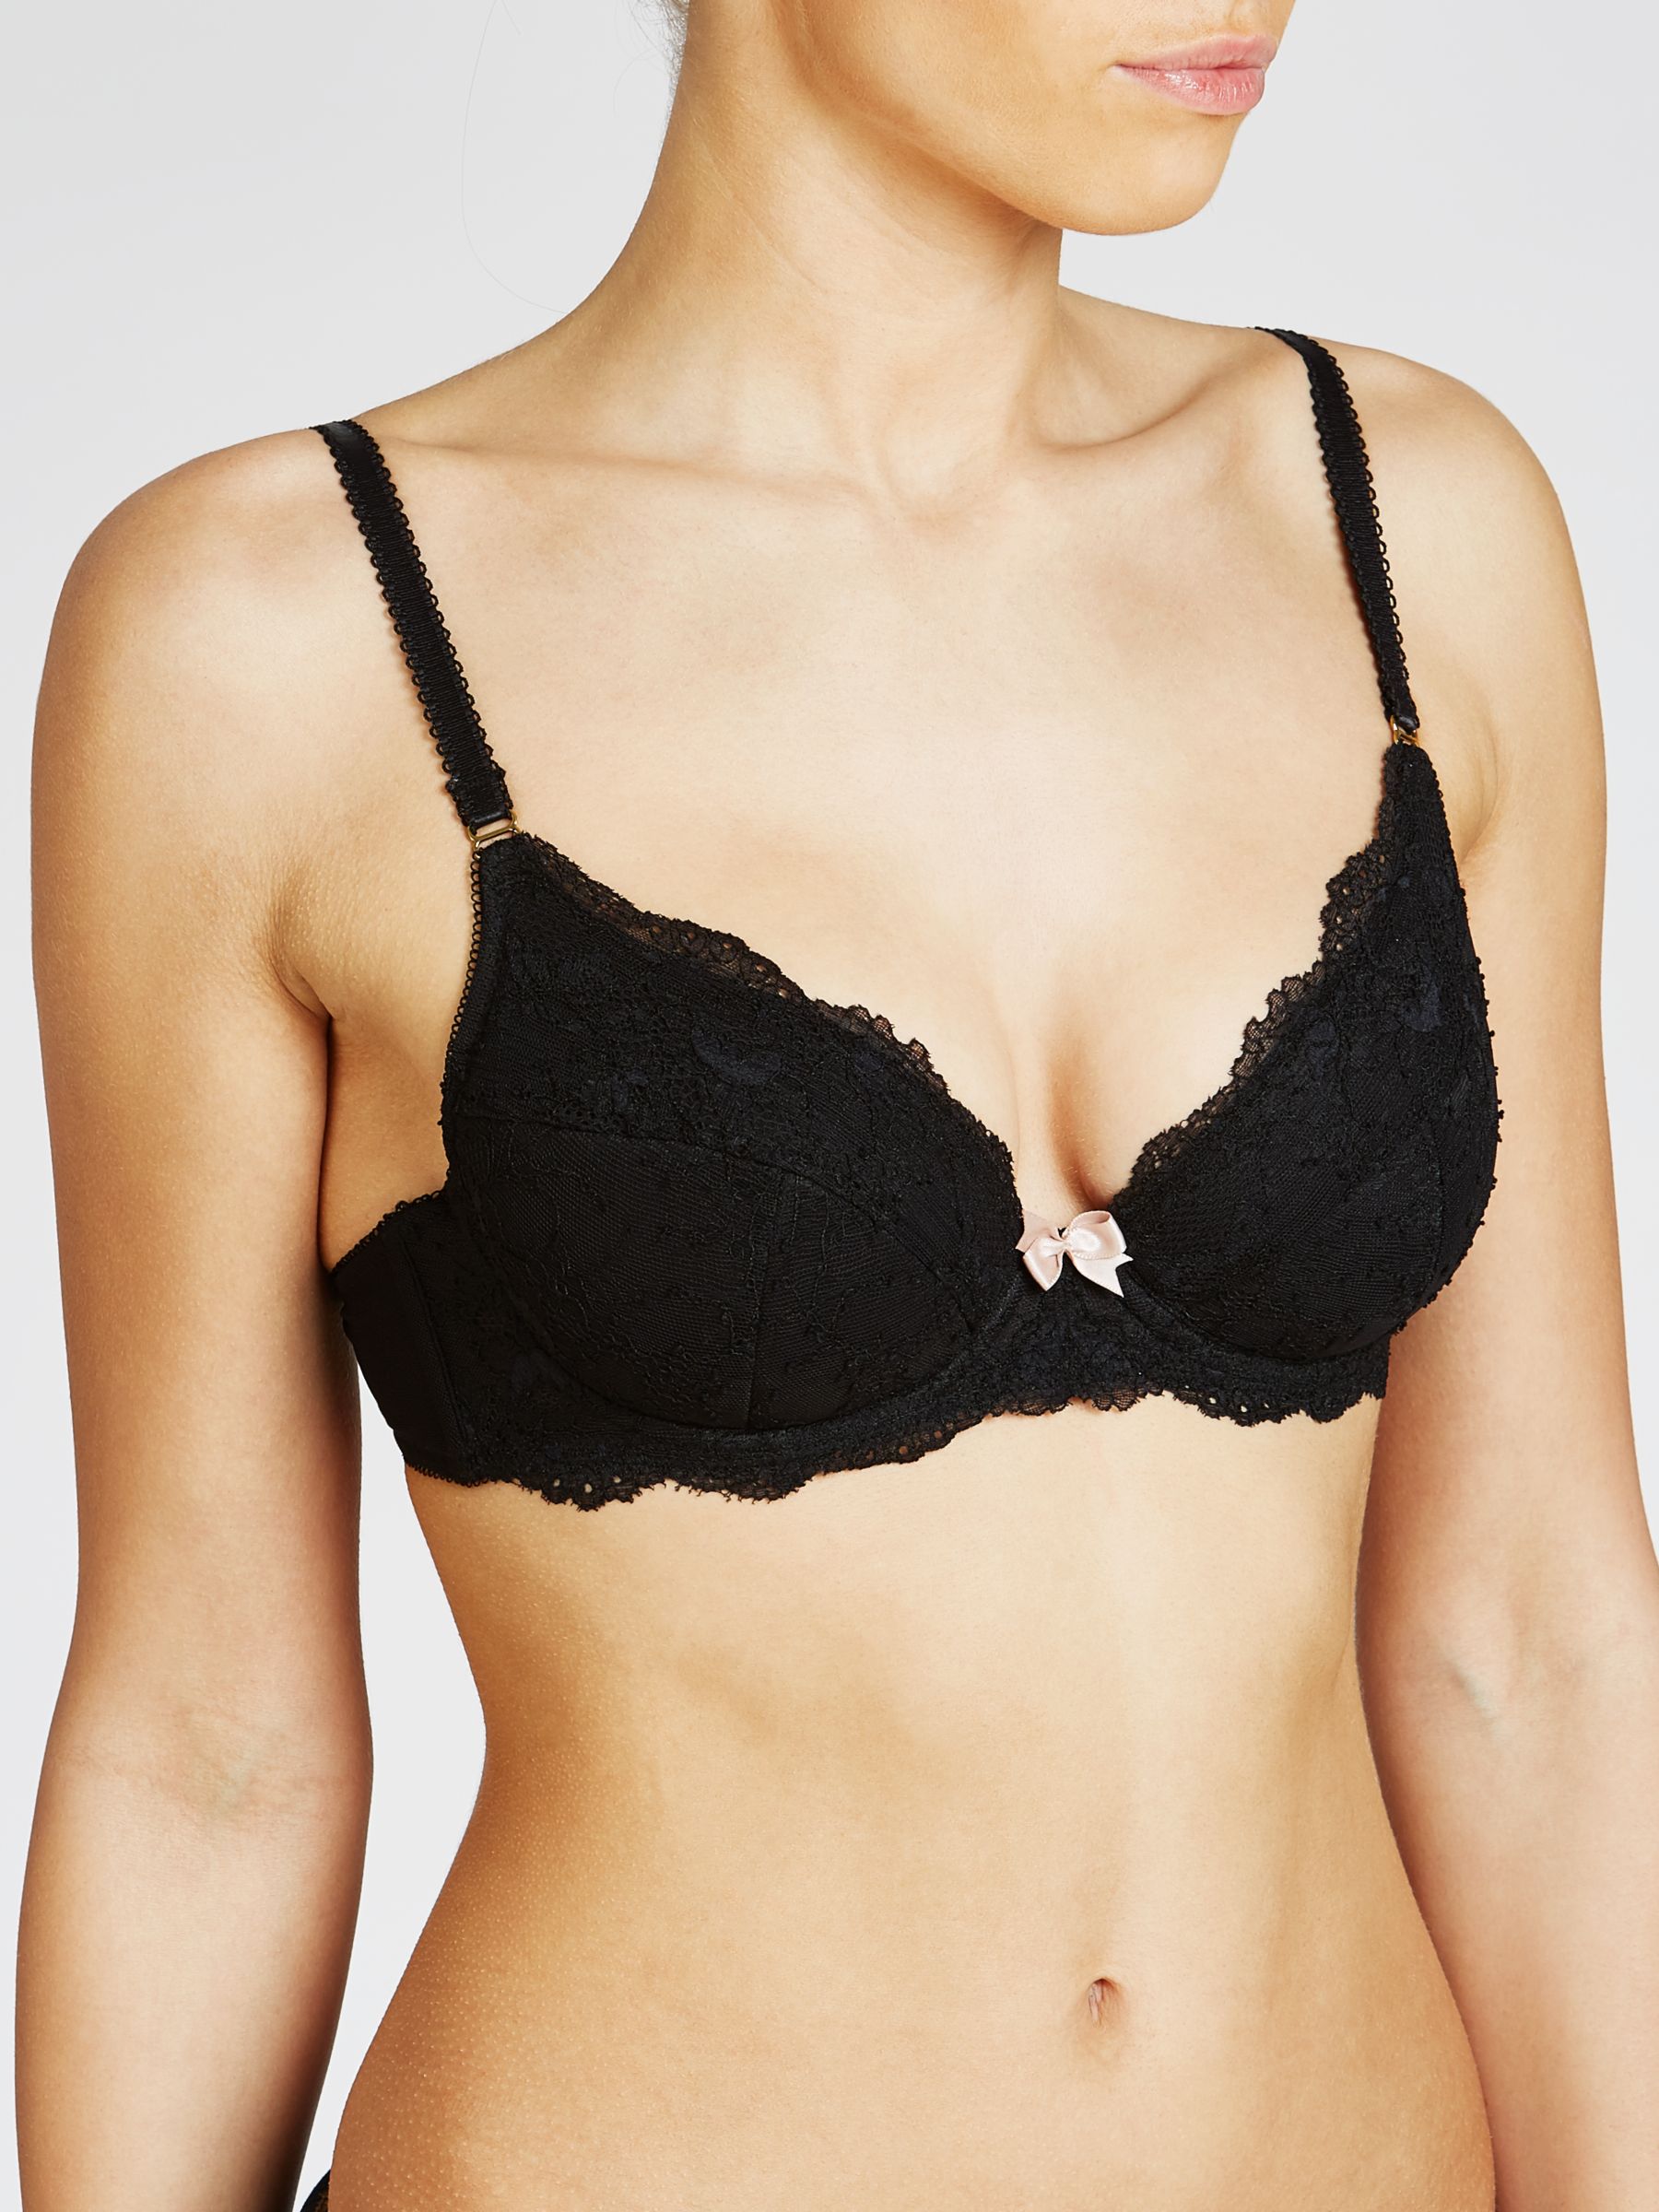 John Lewis Silcone Cleavage Boosters at John Lewis & Partners